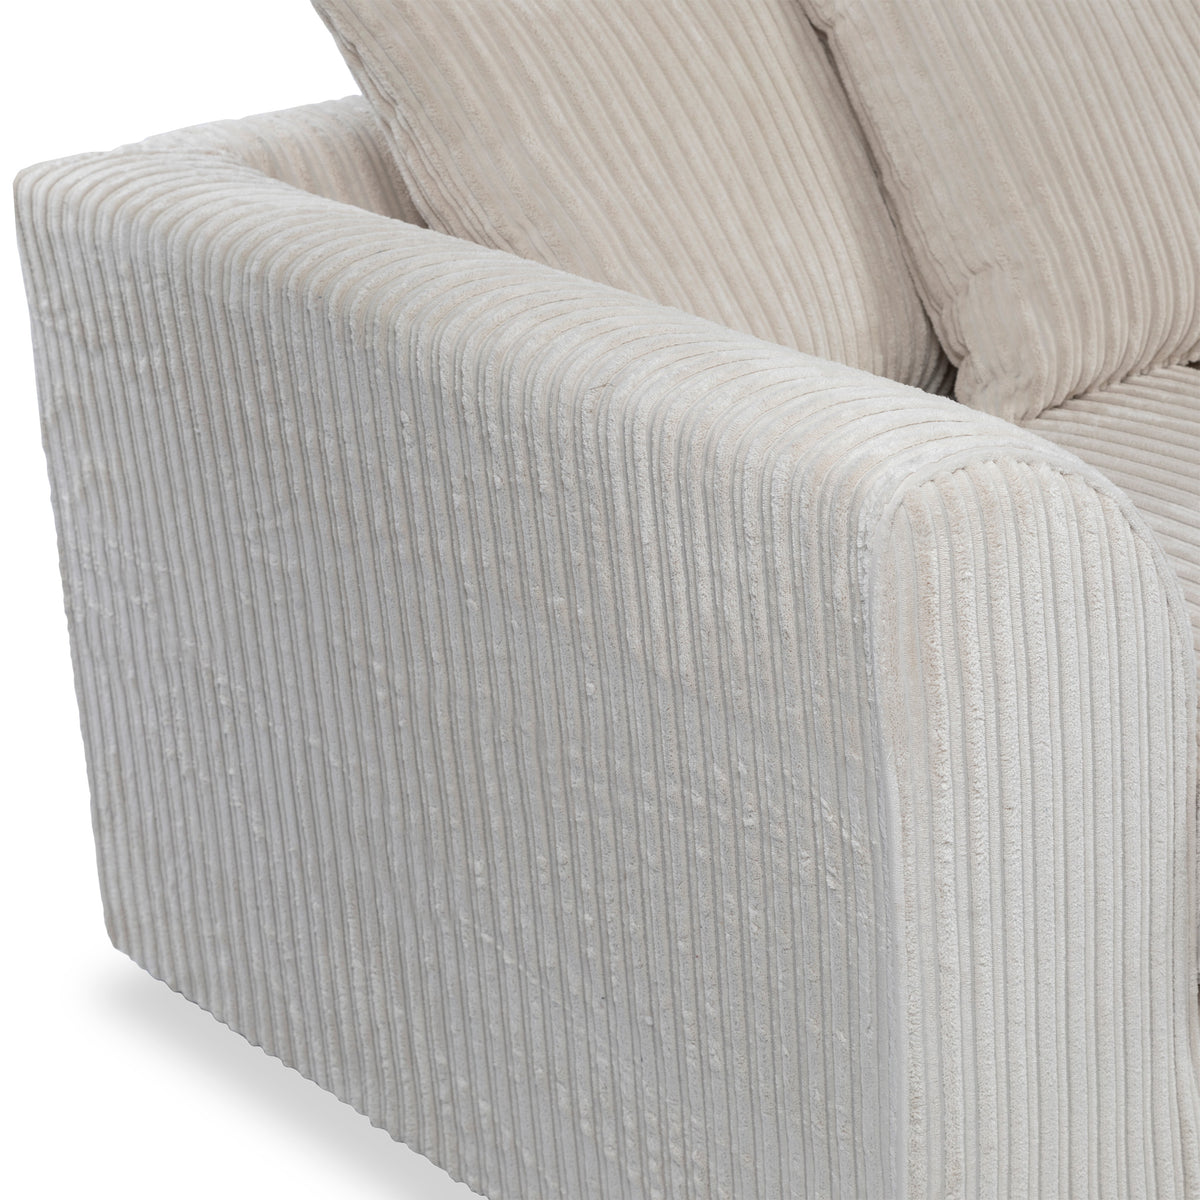 Bletchley Cream Jumbo Cord Chaise Sofa from Roseland Furniture